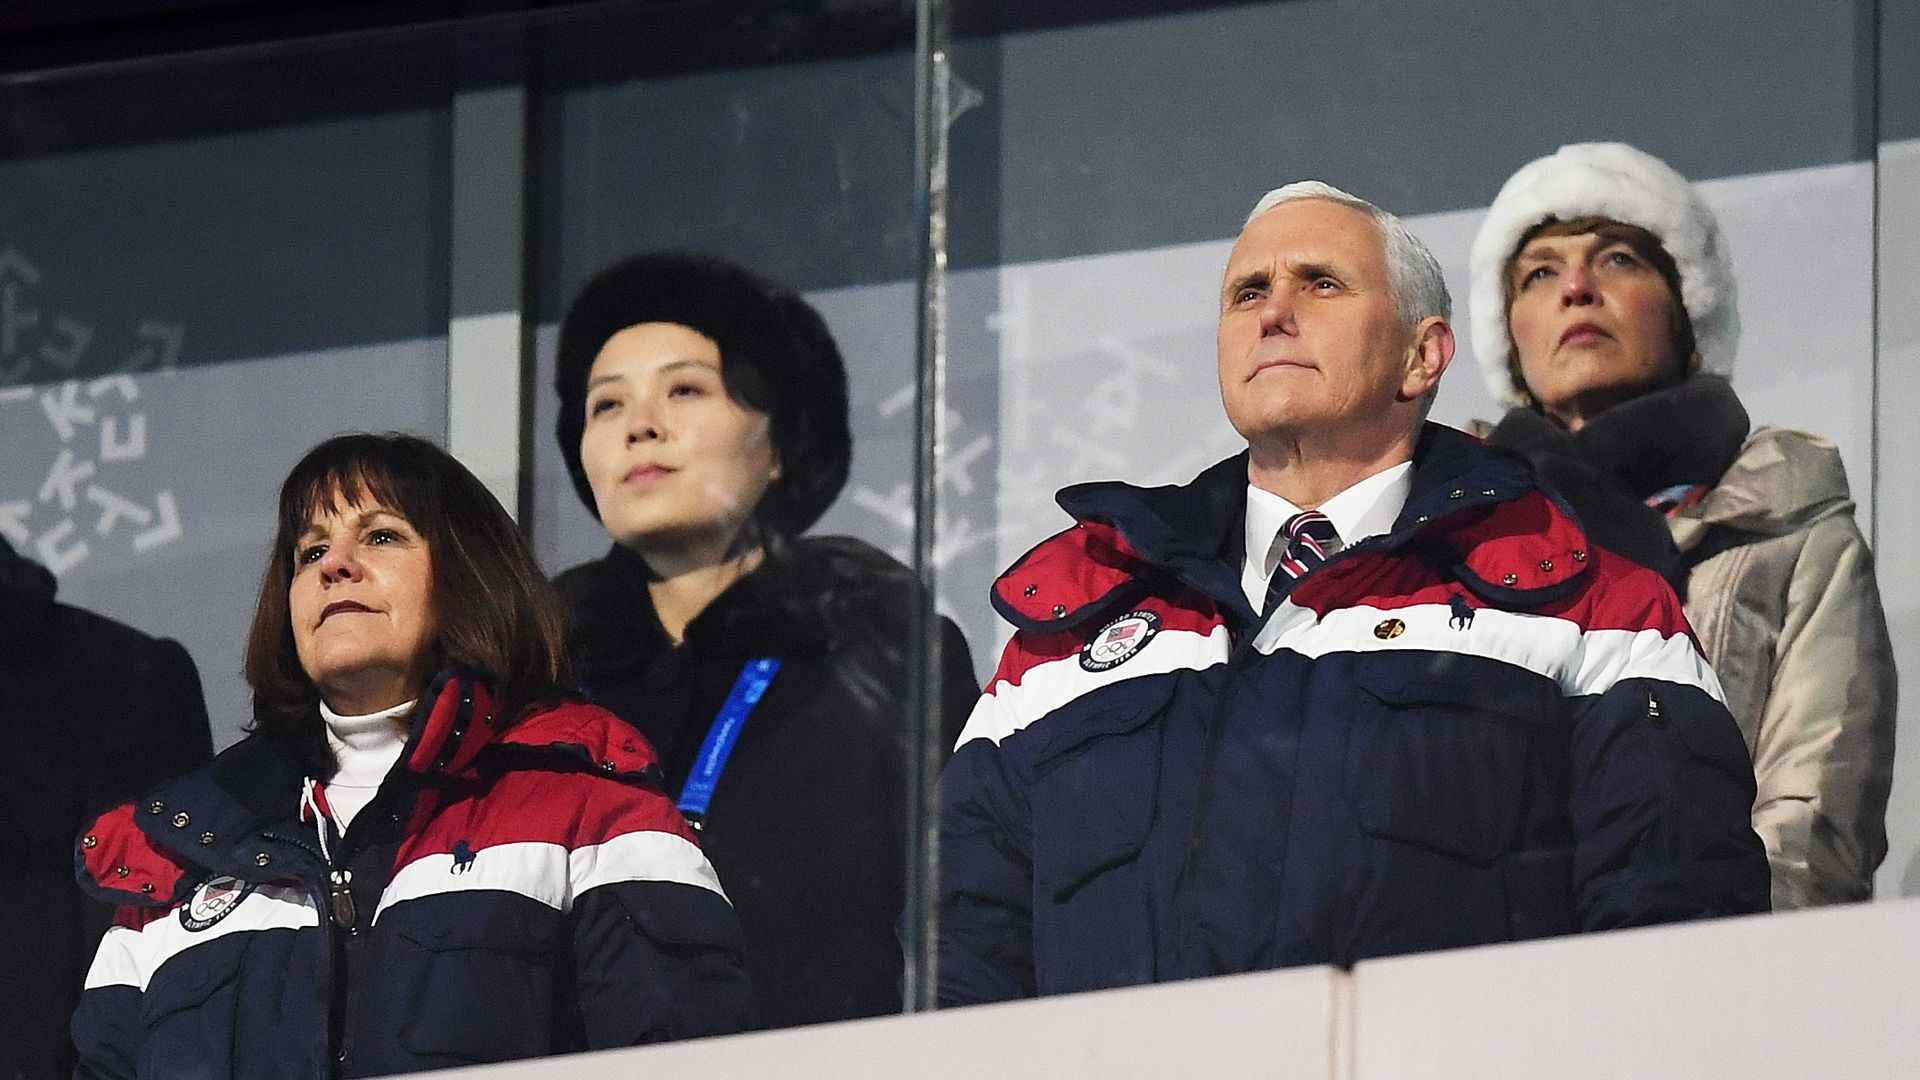 Mike Pence at the Winter Olympics